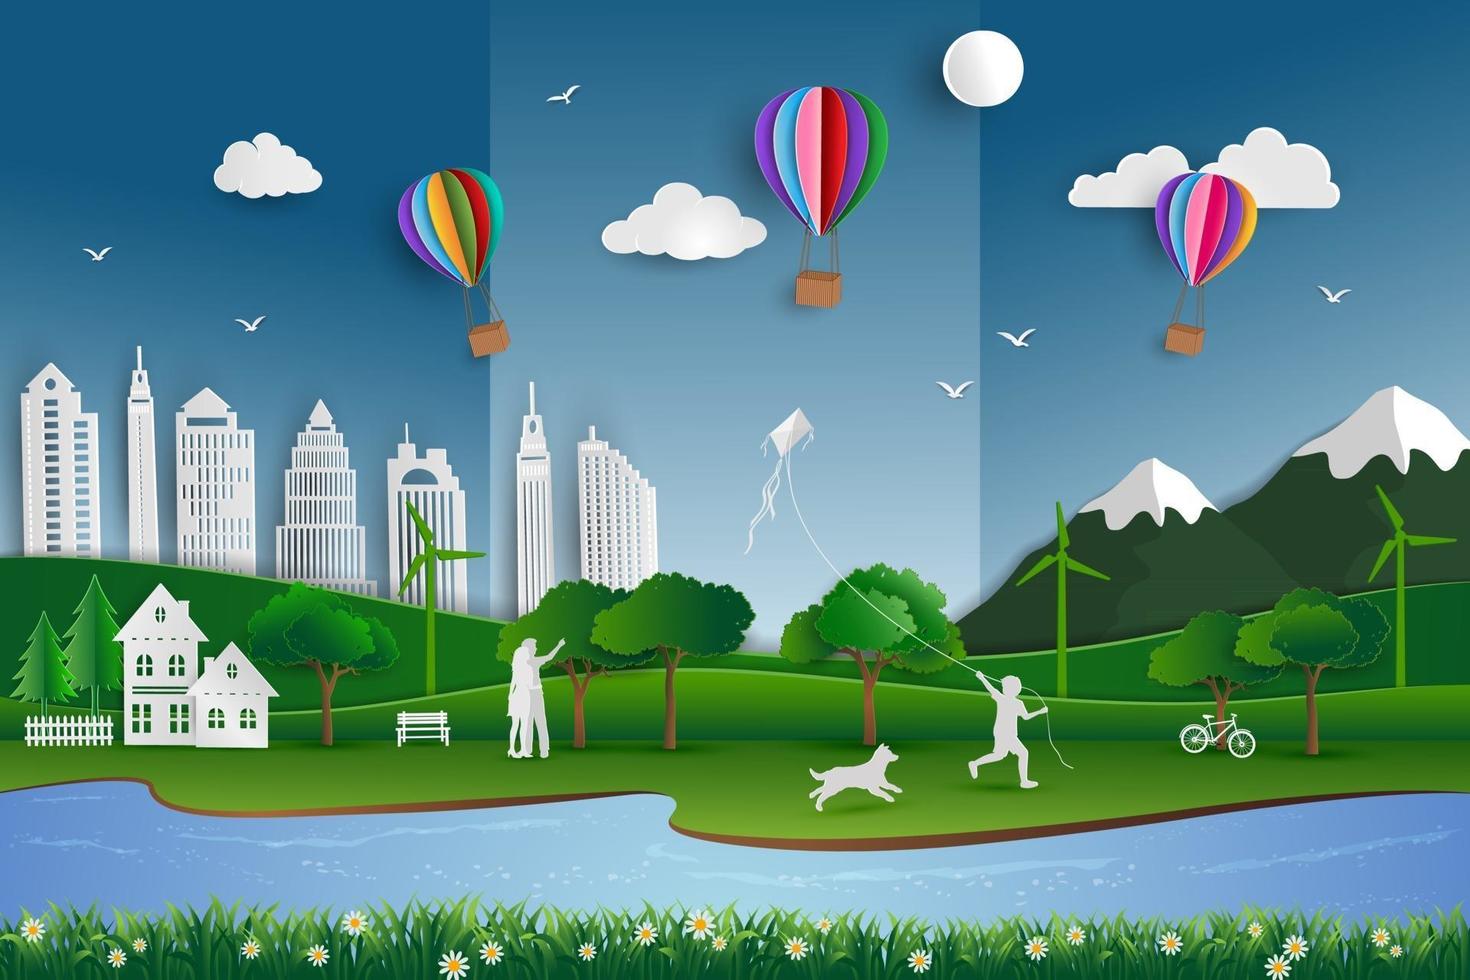 Ecology  friendly city with happy family on paper art scene background vector